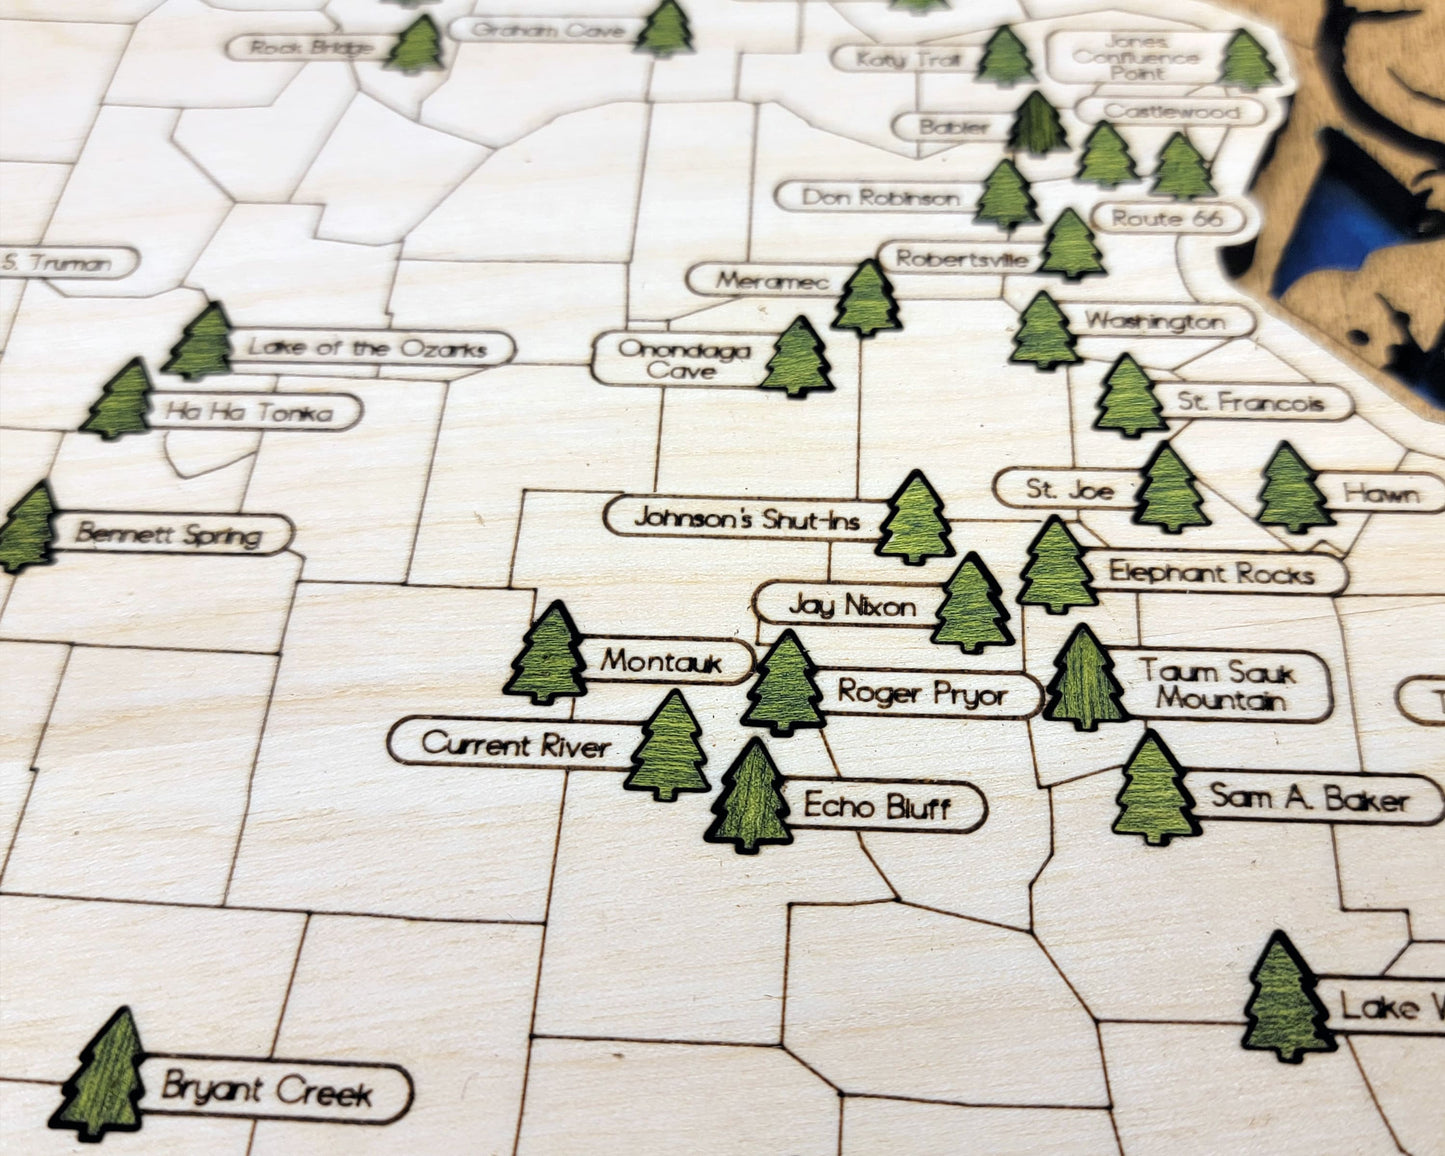 The Missouri State Park Map - Custom and Non Customizable Options - SVG, PDF File Download - Tested in Lightburn and Glowforge